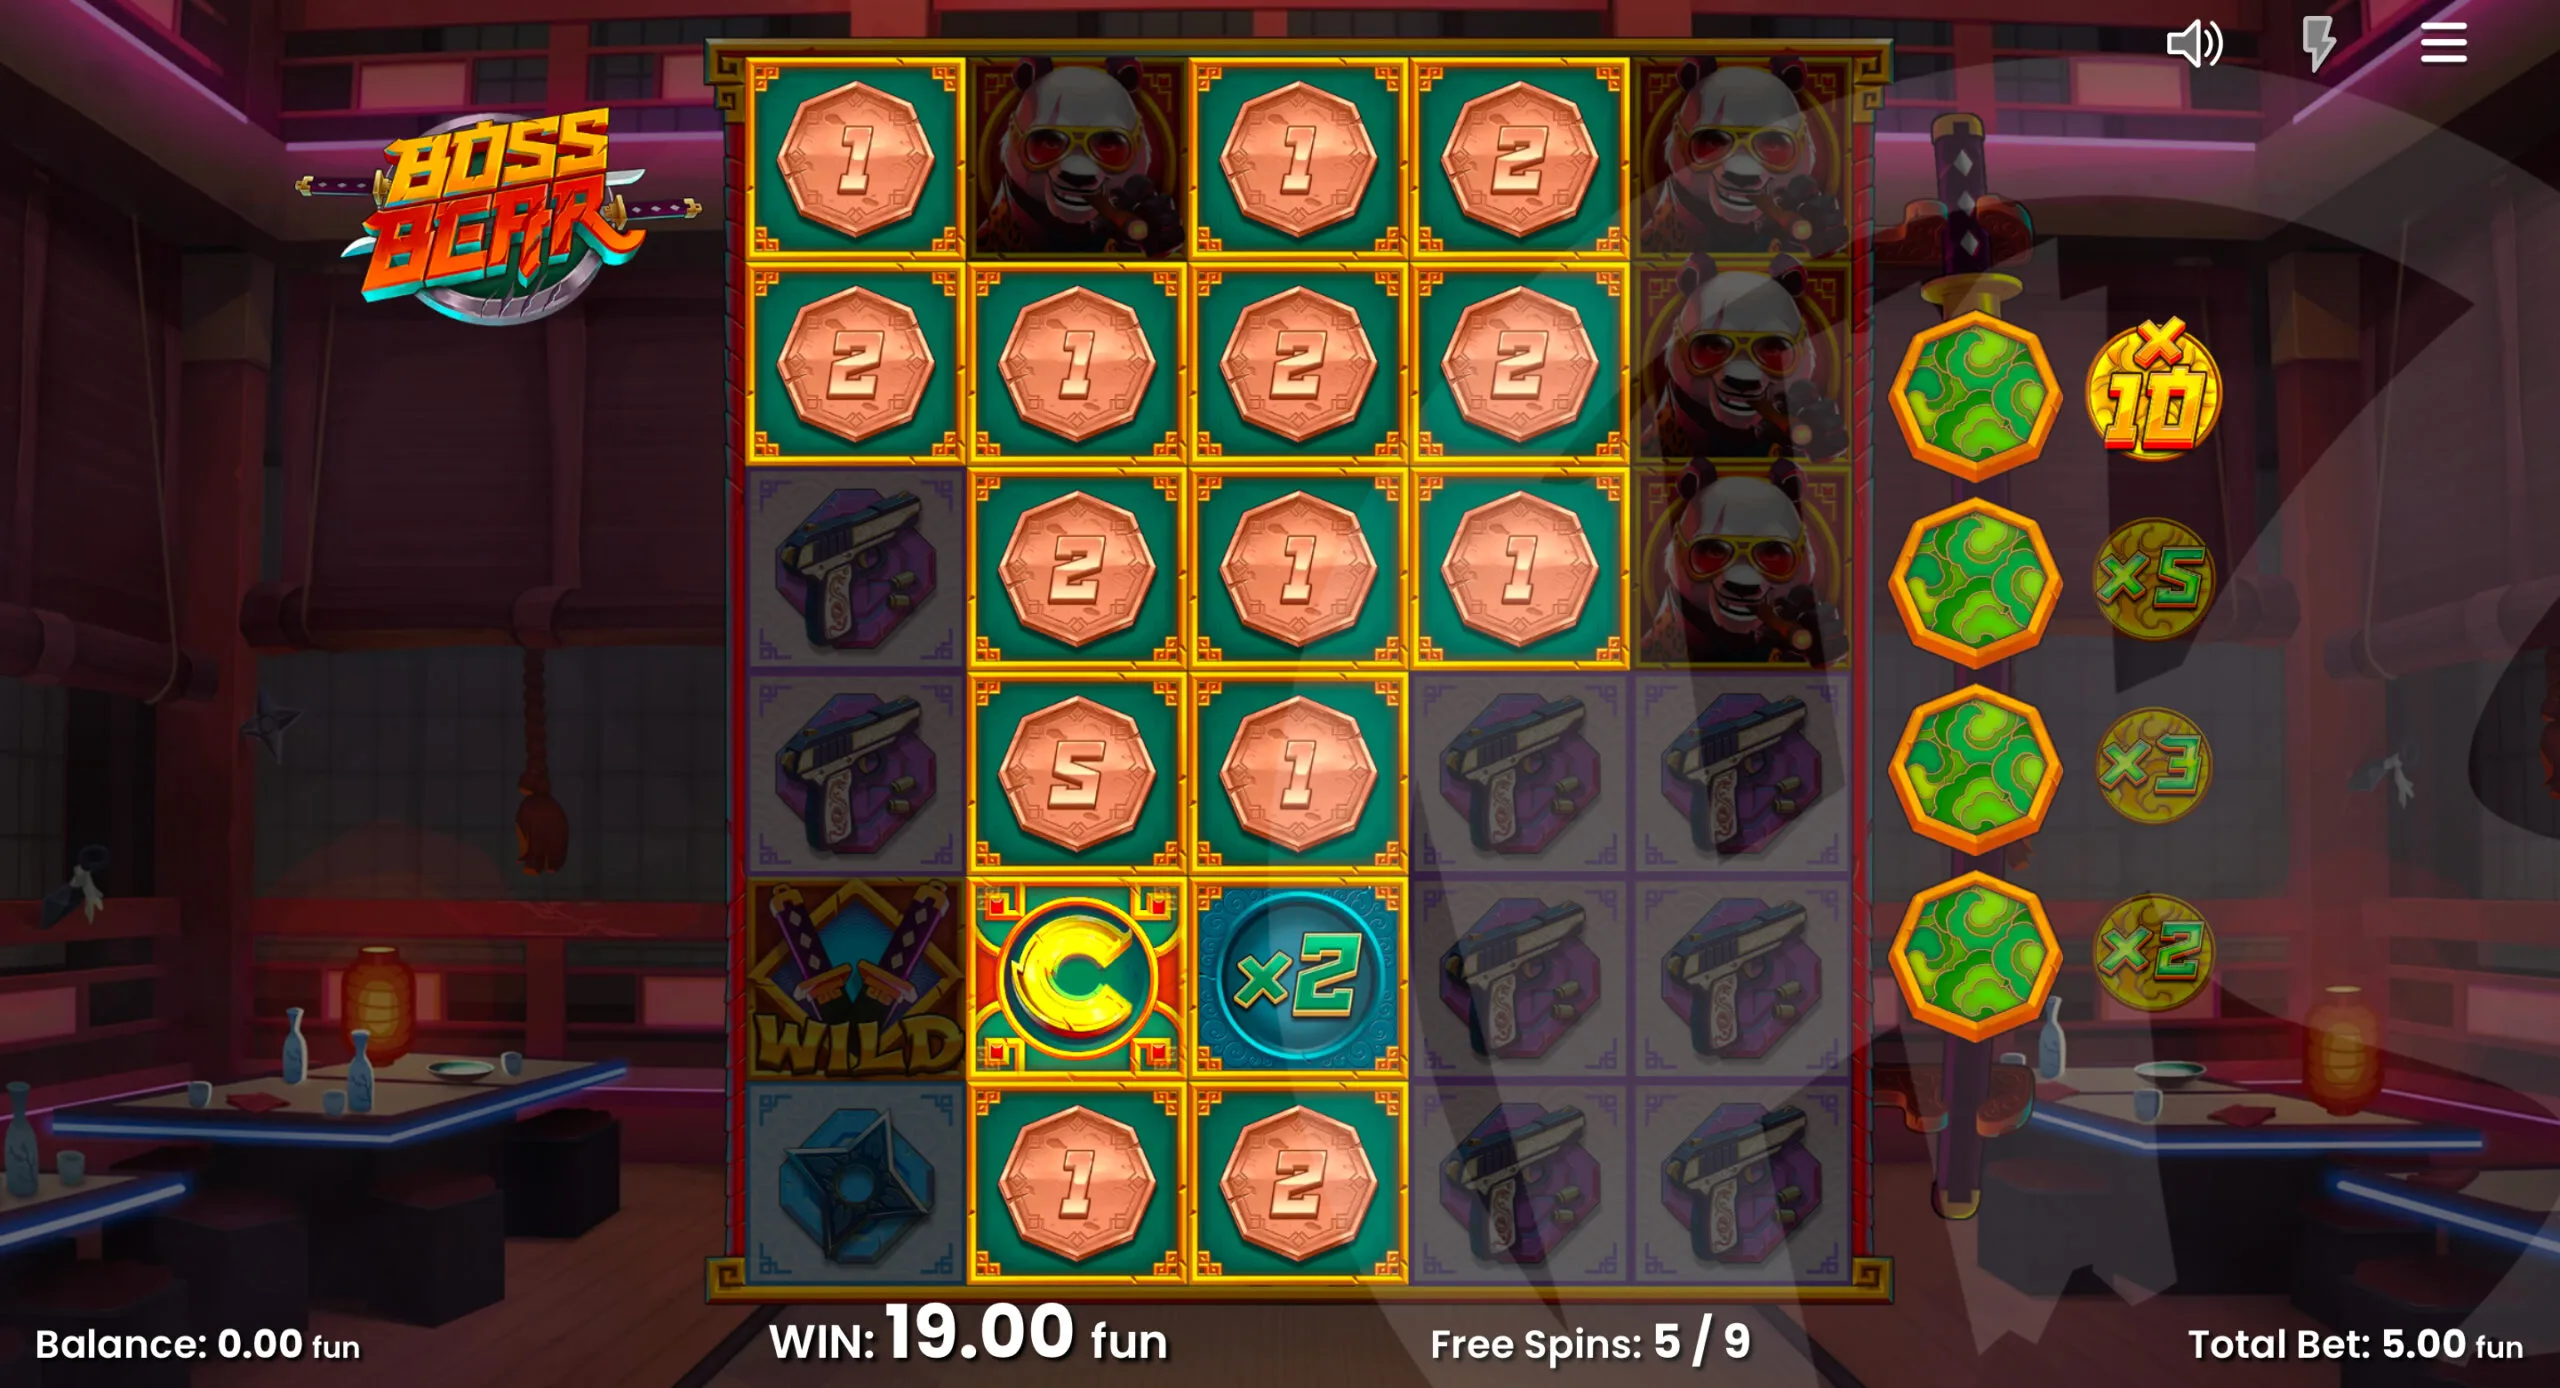 Low Paying Symbols are Converted to Reveal Symbols During Free Spins and a Multiplier is Active